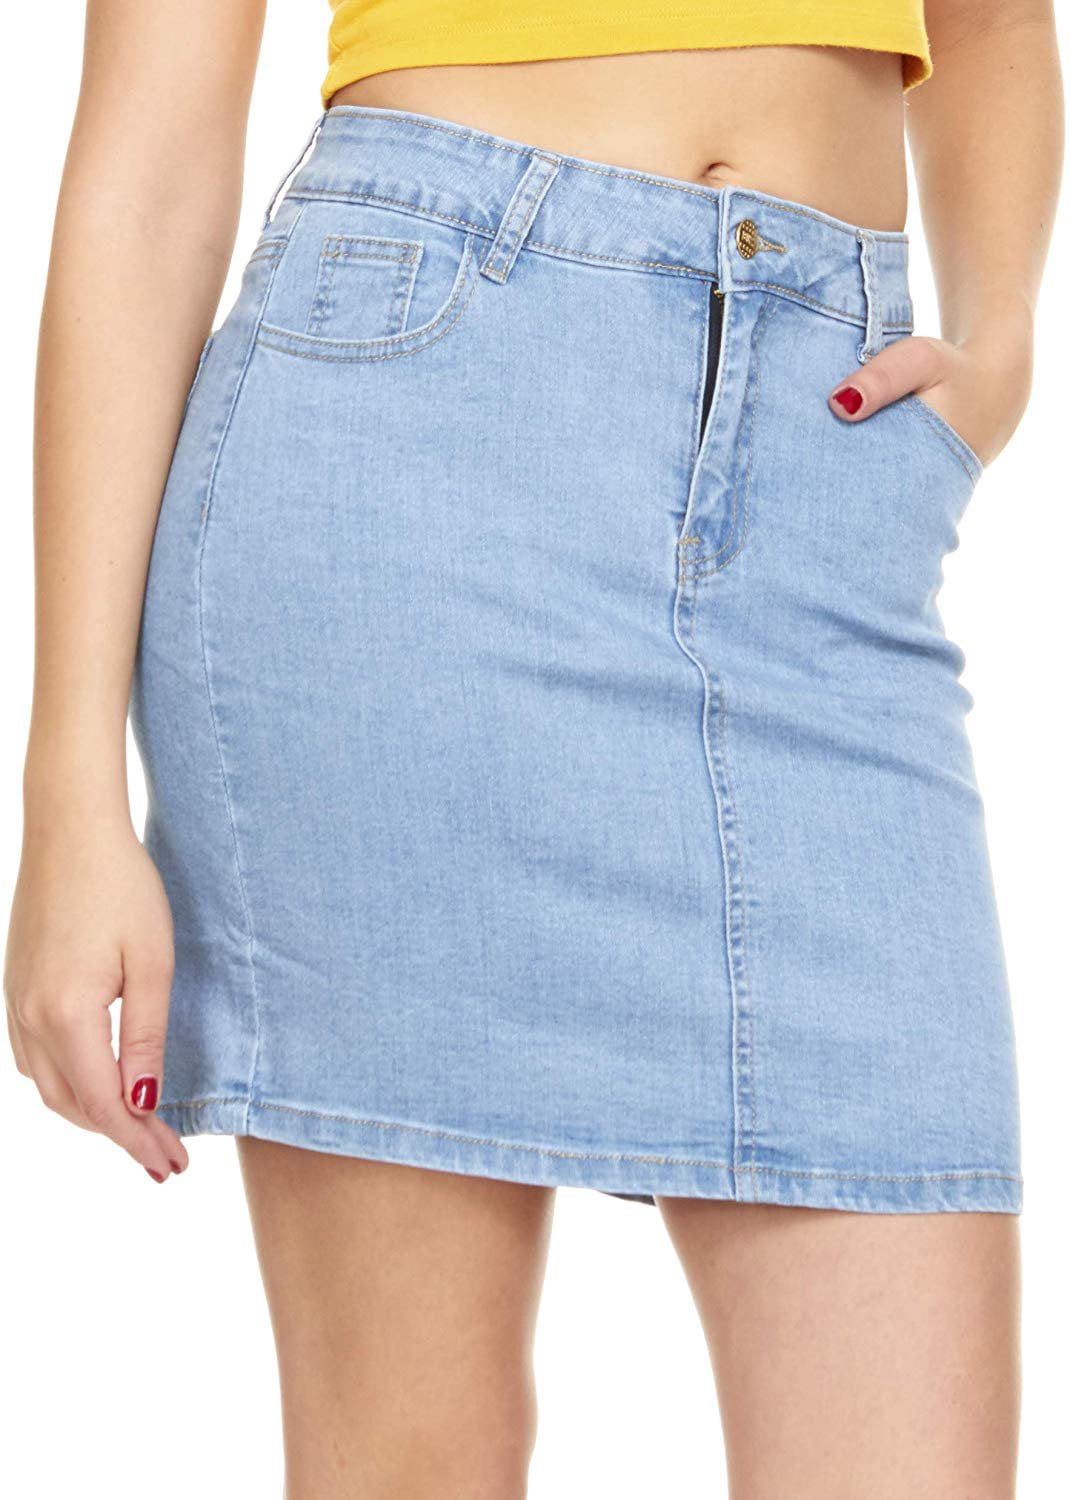 jeans skirts for juniors